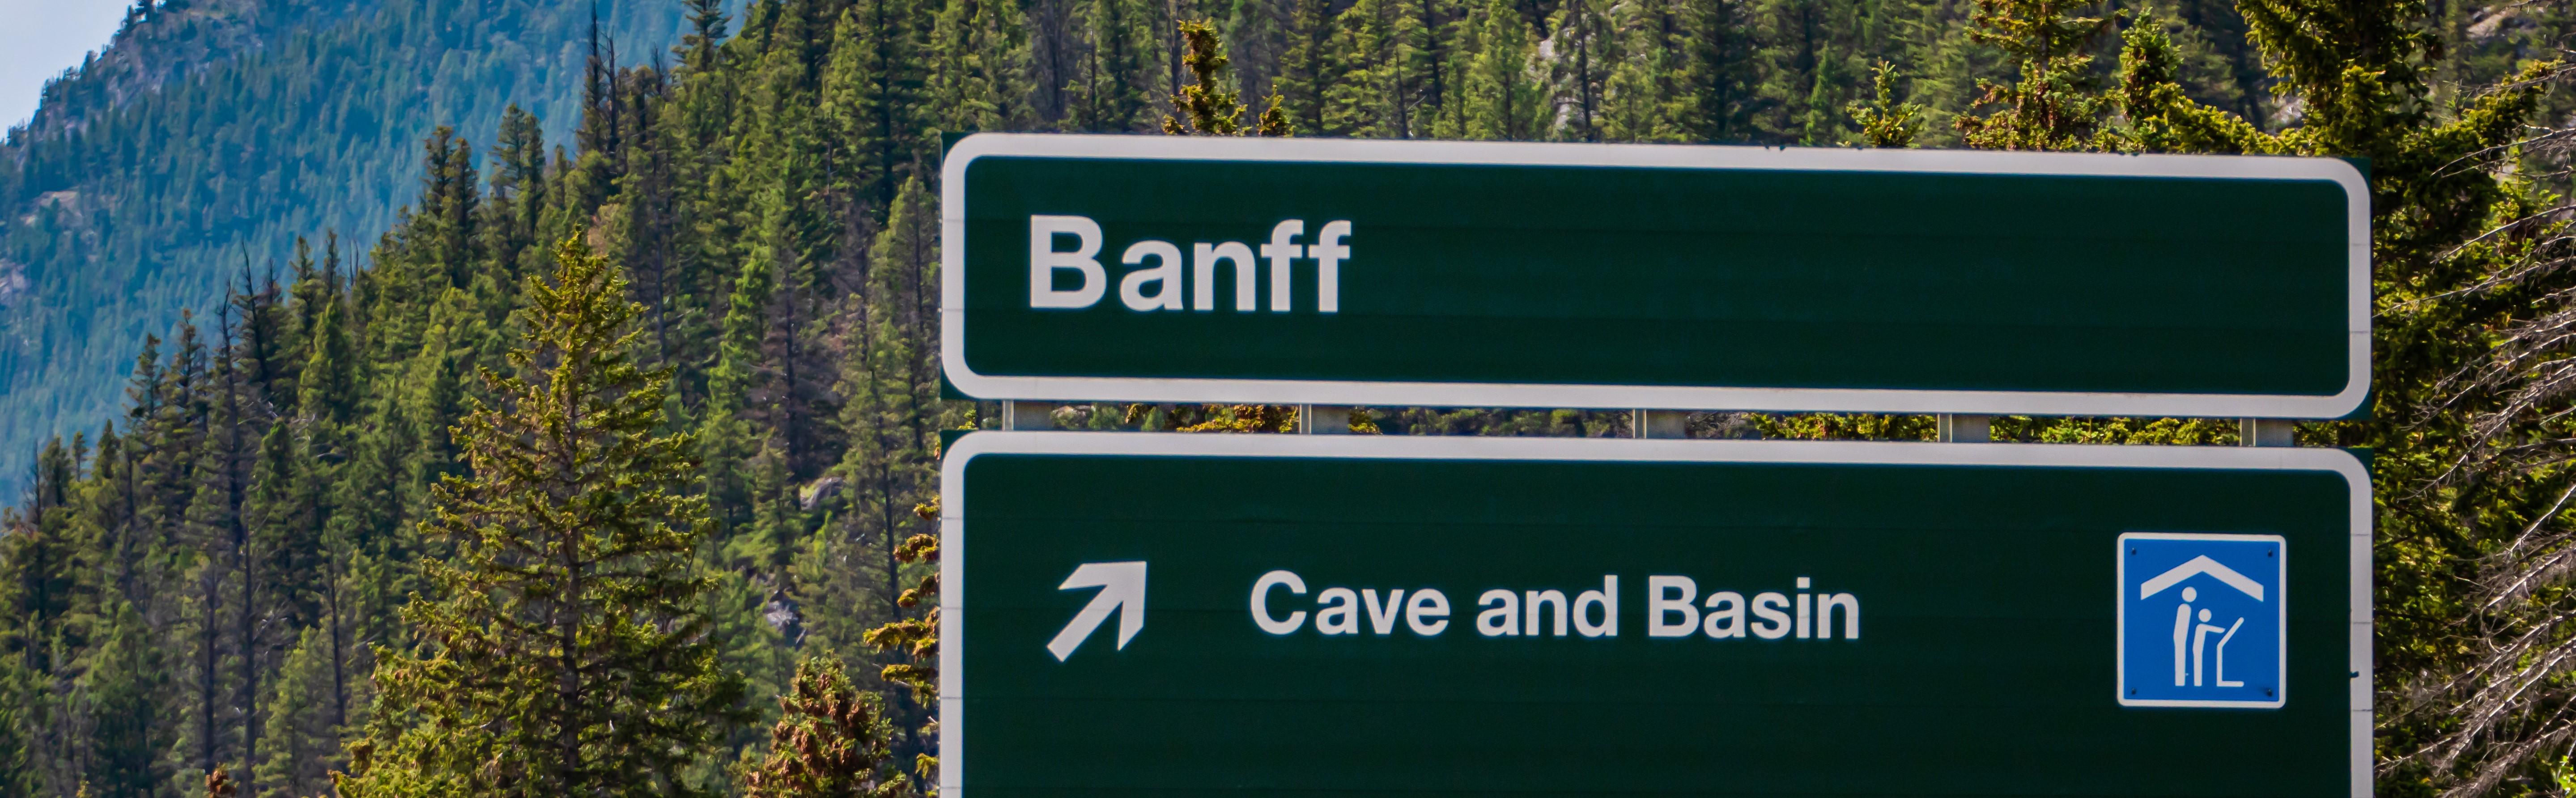 Green Parks Canada highway sign. Forest landscape in the background. Blue and white icon describing the Cave and Basin. 